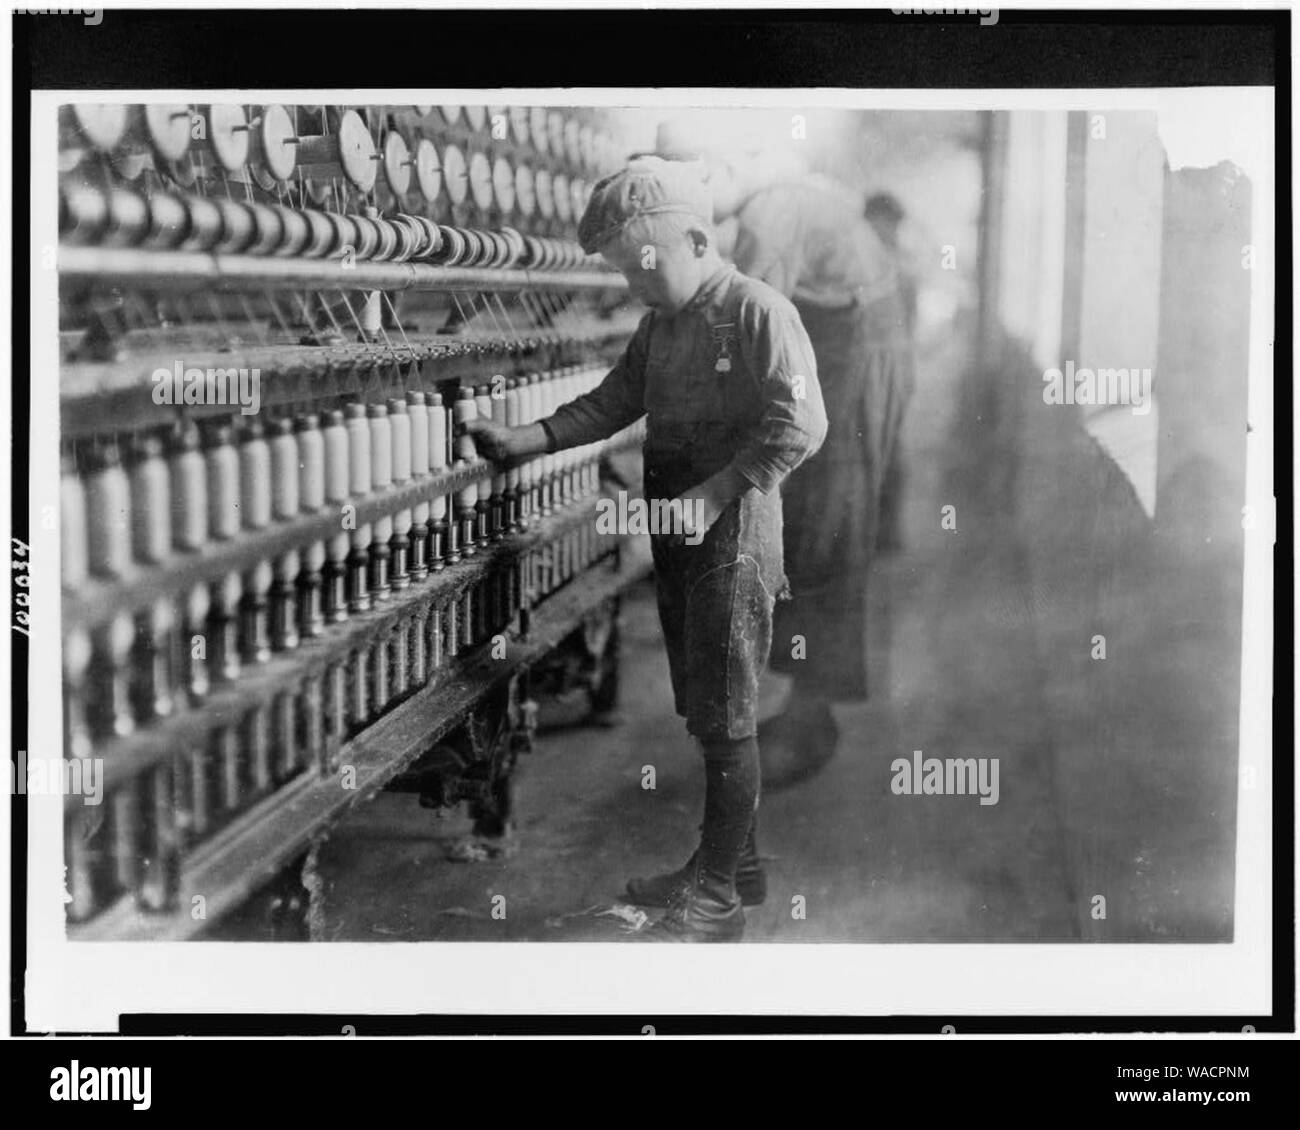 Doffer in Mellville Mfg. Co., Cherryville, N.C. Said he had been working for two years. Many of them below age. Stock Photo